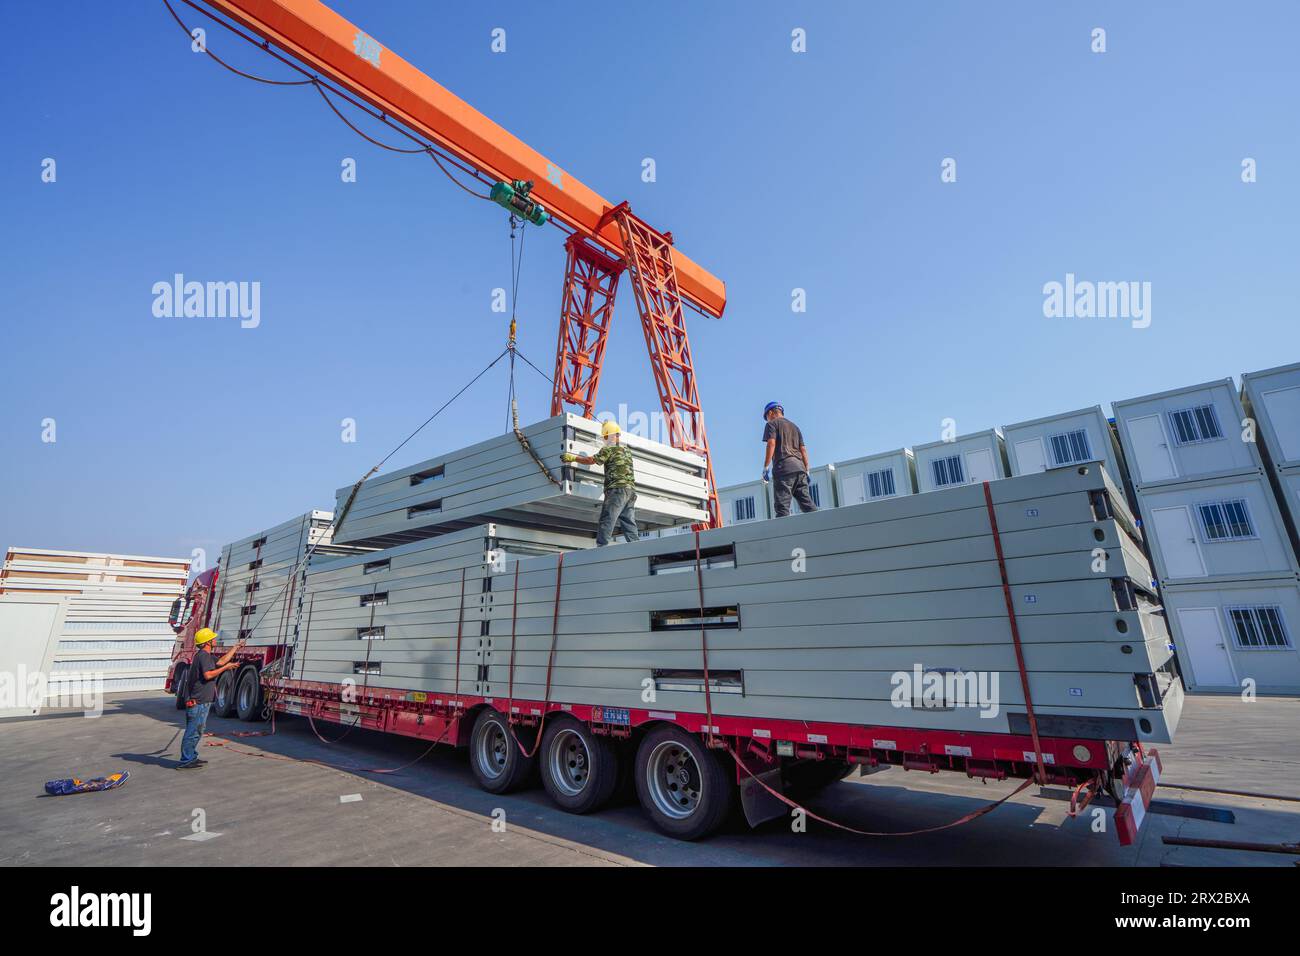 Luannan County, China - September 21, 2022: Workers load and transport in the lifting box room, North China Stock Photo